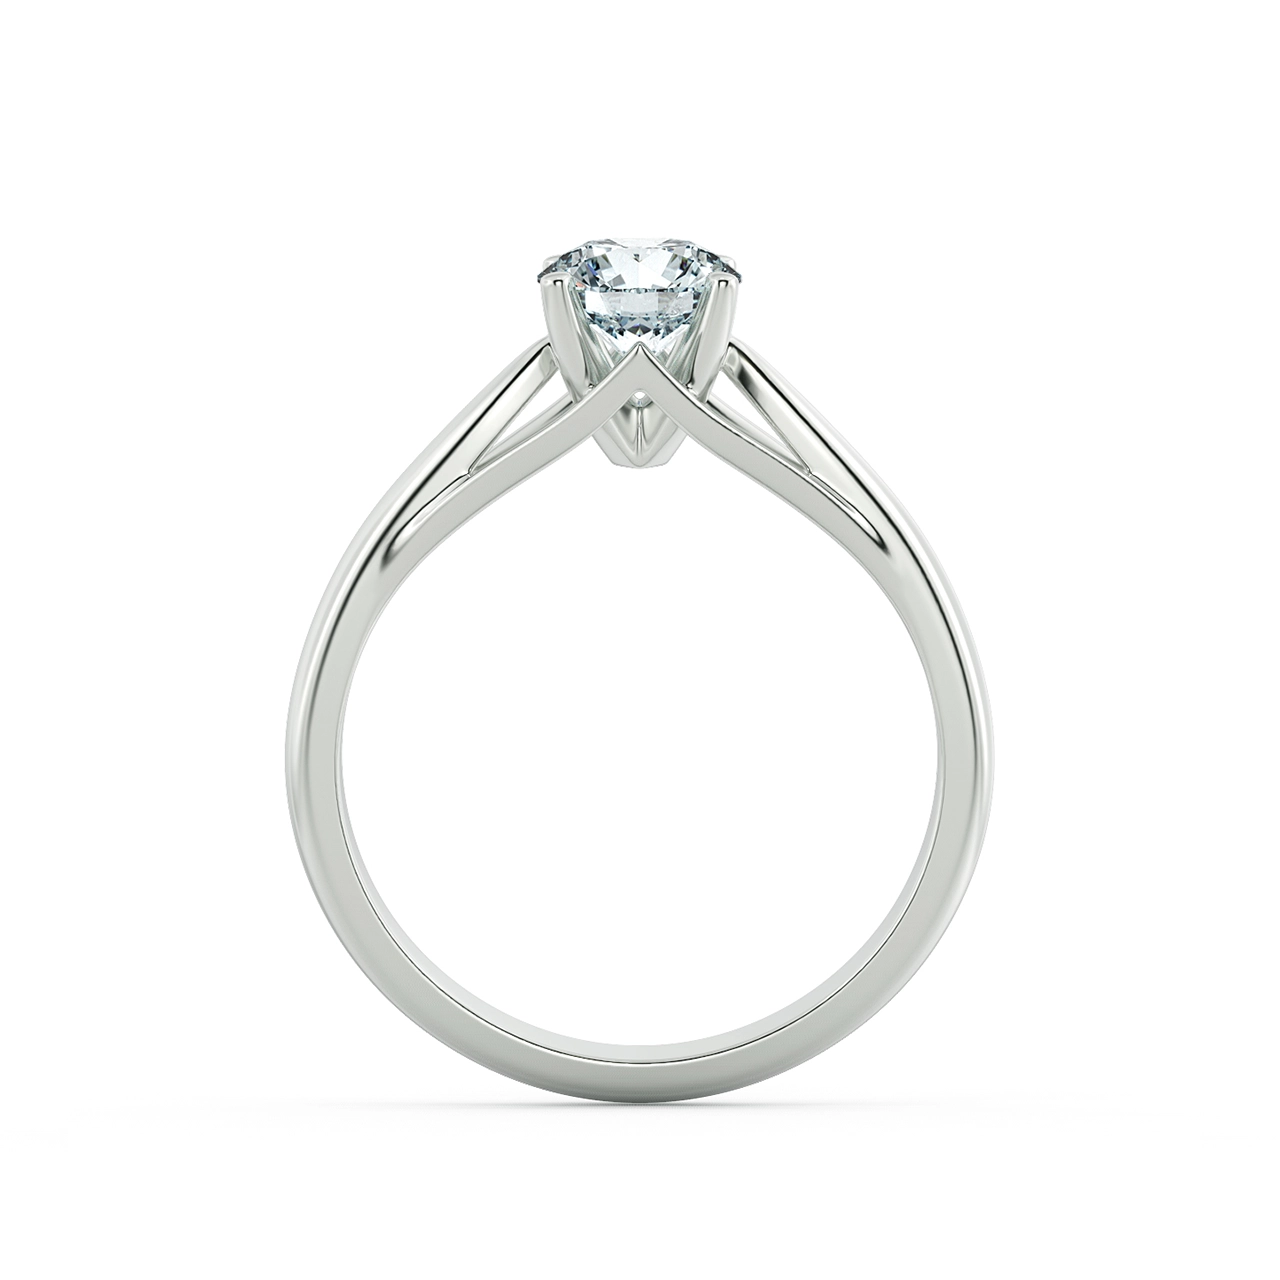 Shiny Trellis Engagement Ring with Four Prong Stylized NCH1405 5